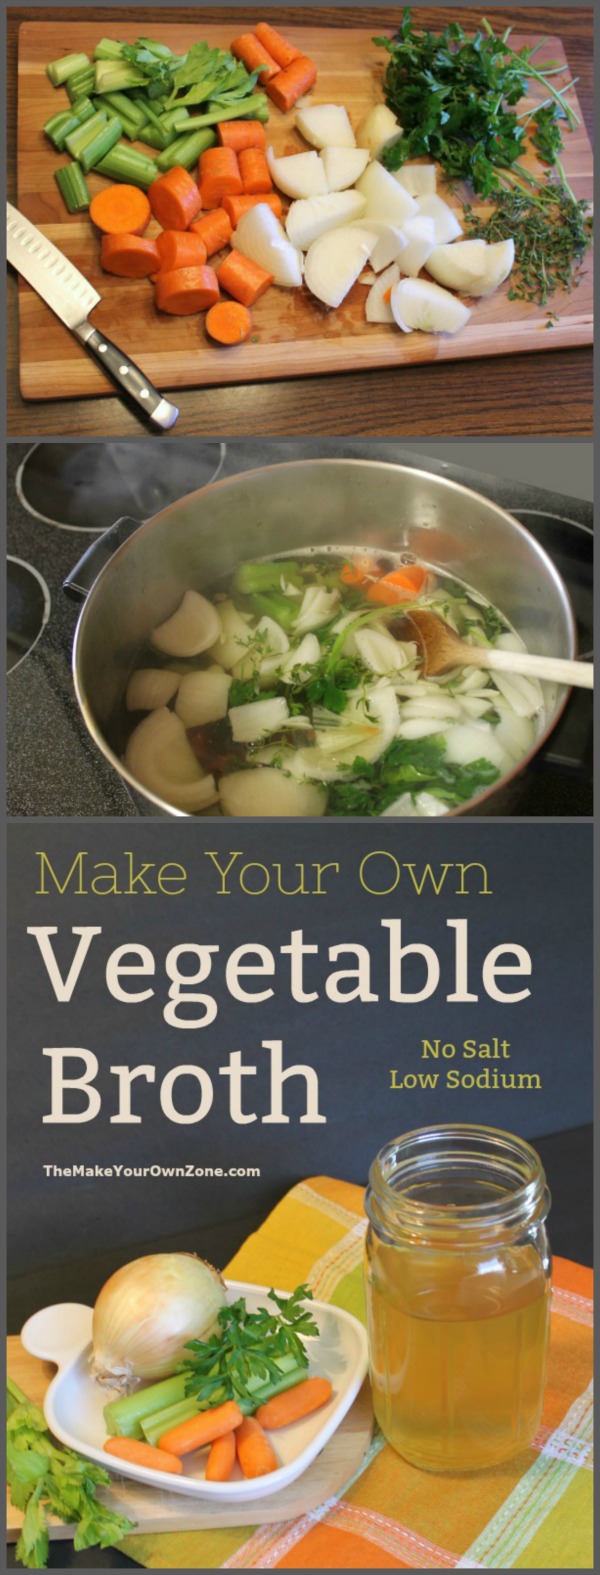 How to make your own vegetable stock - An easy homemade recipe to make homemade low sodium vegetable broth